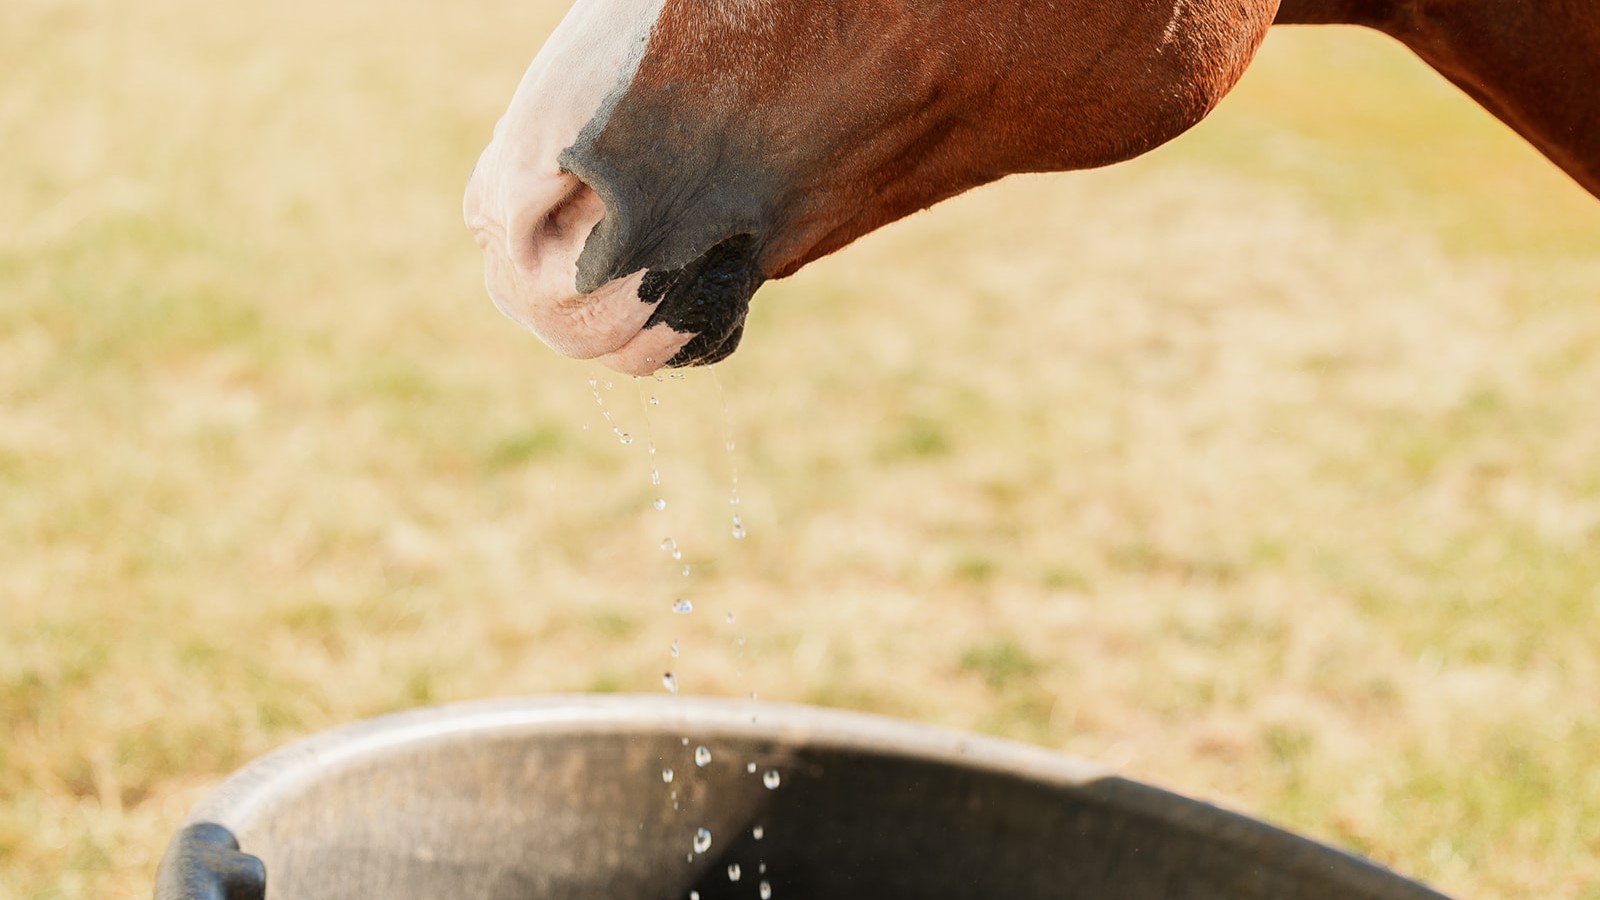 A hydrated horse drinking water from a trough.